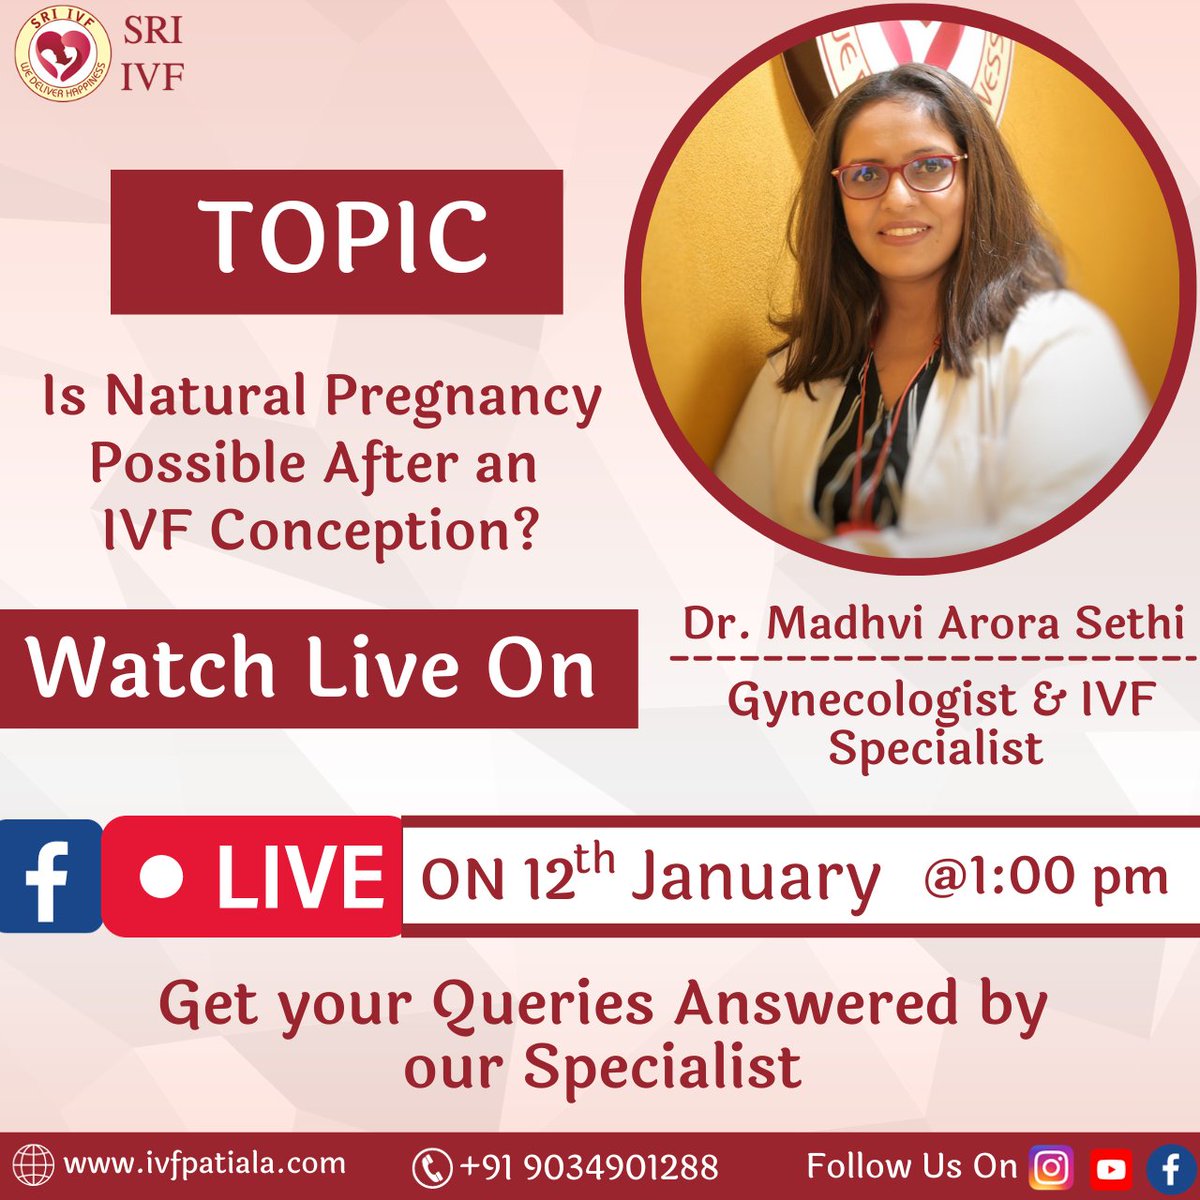 Join the live session on Facebook with Dr. Madhvi Arora Sethi On 12th January 2023, Friday
Time- 1:00 pm   
 
#Pregnancy #Naturalpregnancy #fblive #ivftreatment #infertilitytreatment #infertility #IVF #patiala #drmadhaviarorasethi #bestivfcentreinpatiala #sriivfpatiala #punjab